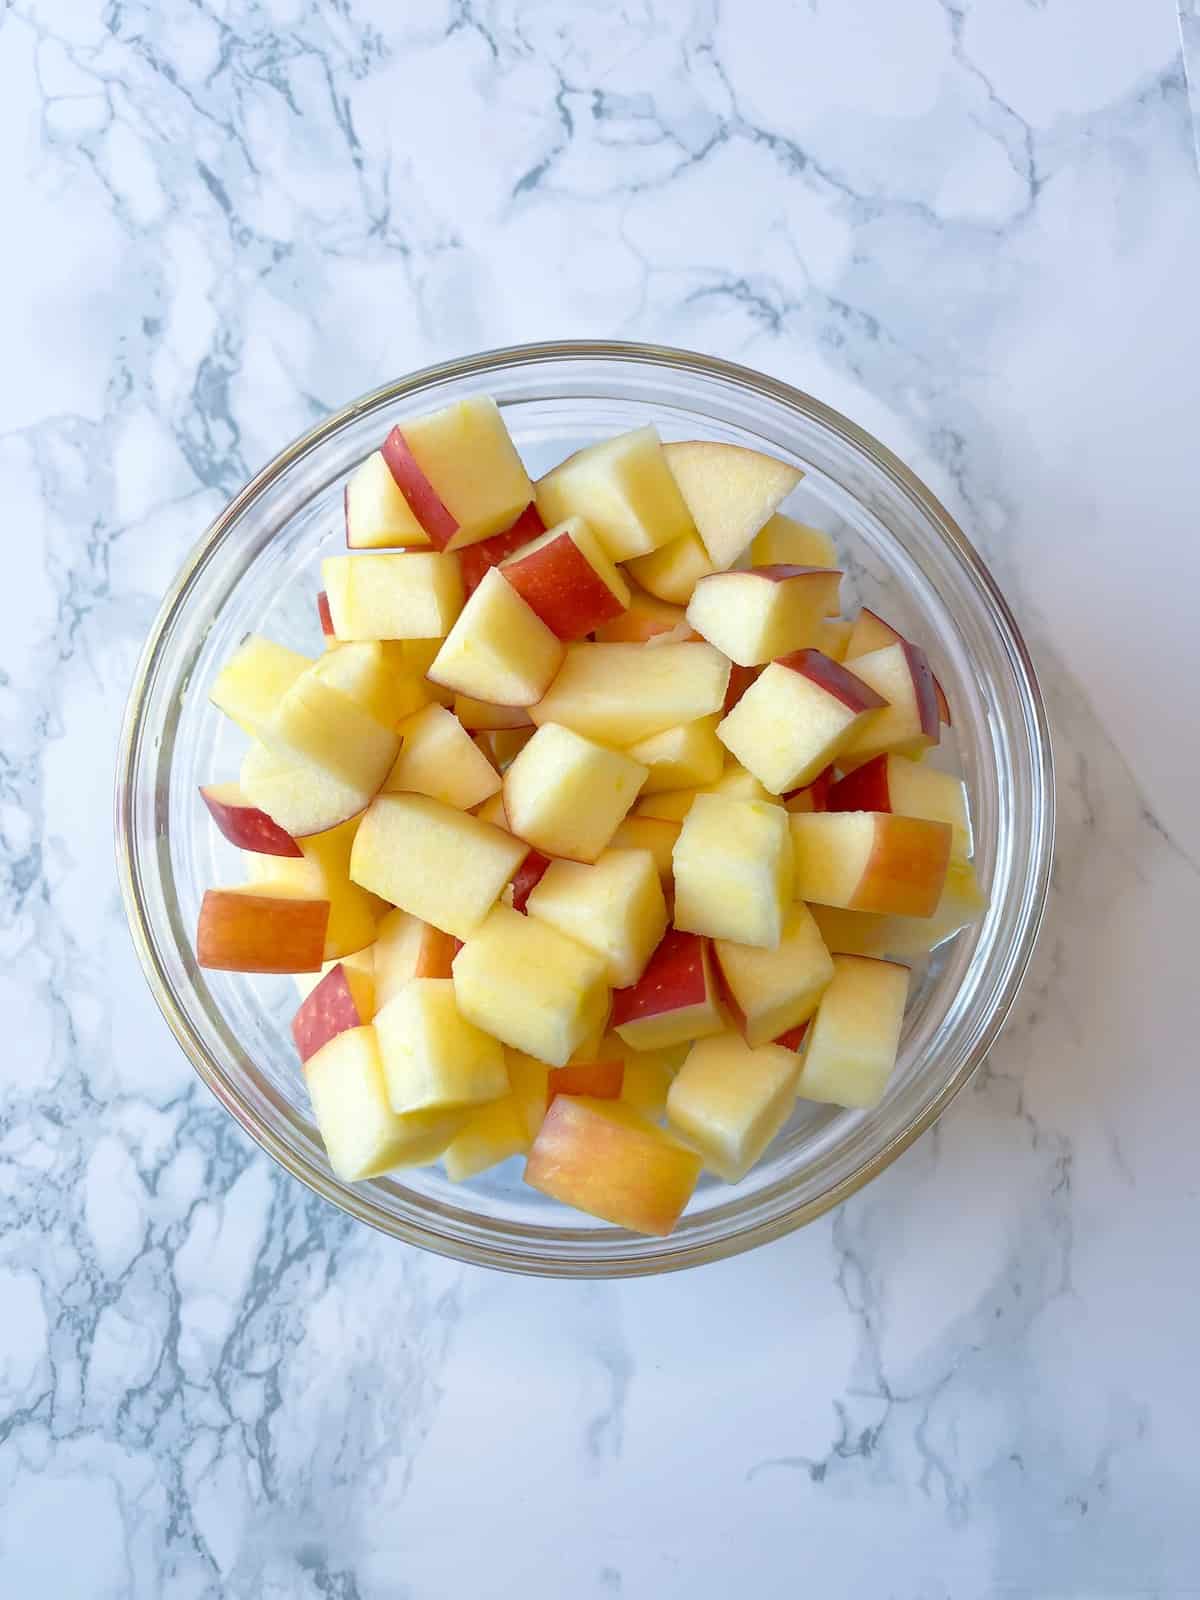 diced apple in a glass bowl on a marble table